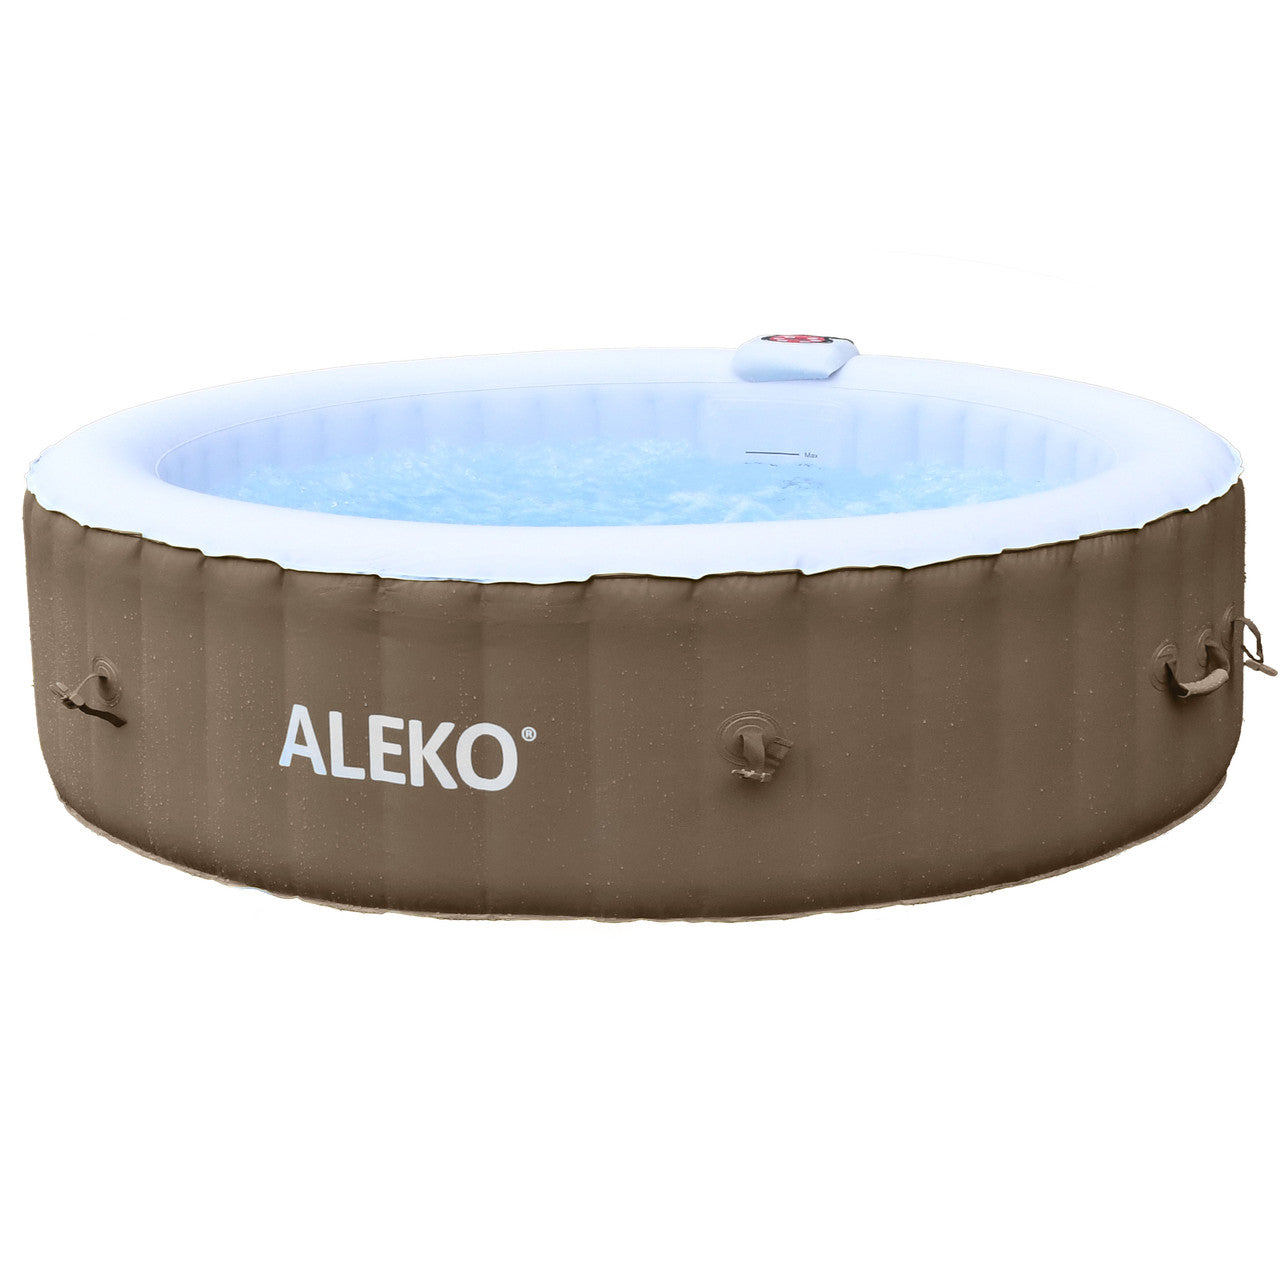 Aleko Round Inflatable Jetted Hot Tub with Cover - 6 Person - 265 Gallon - Brown HTIR6GYBR-AP - Serenity Provision